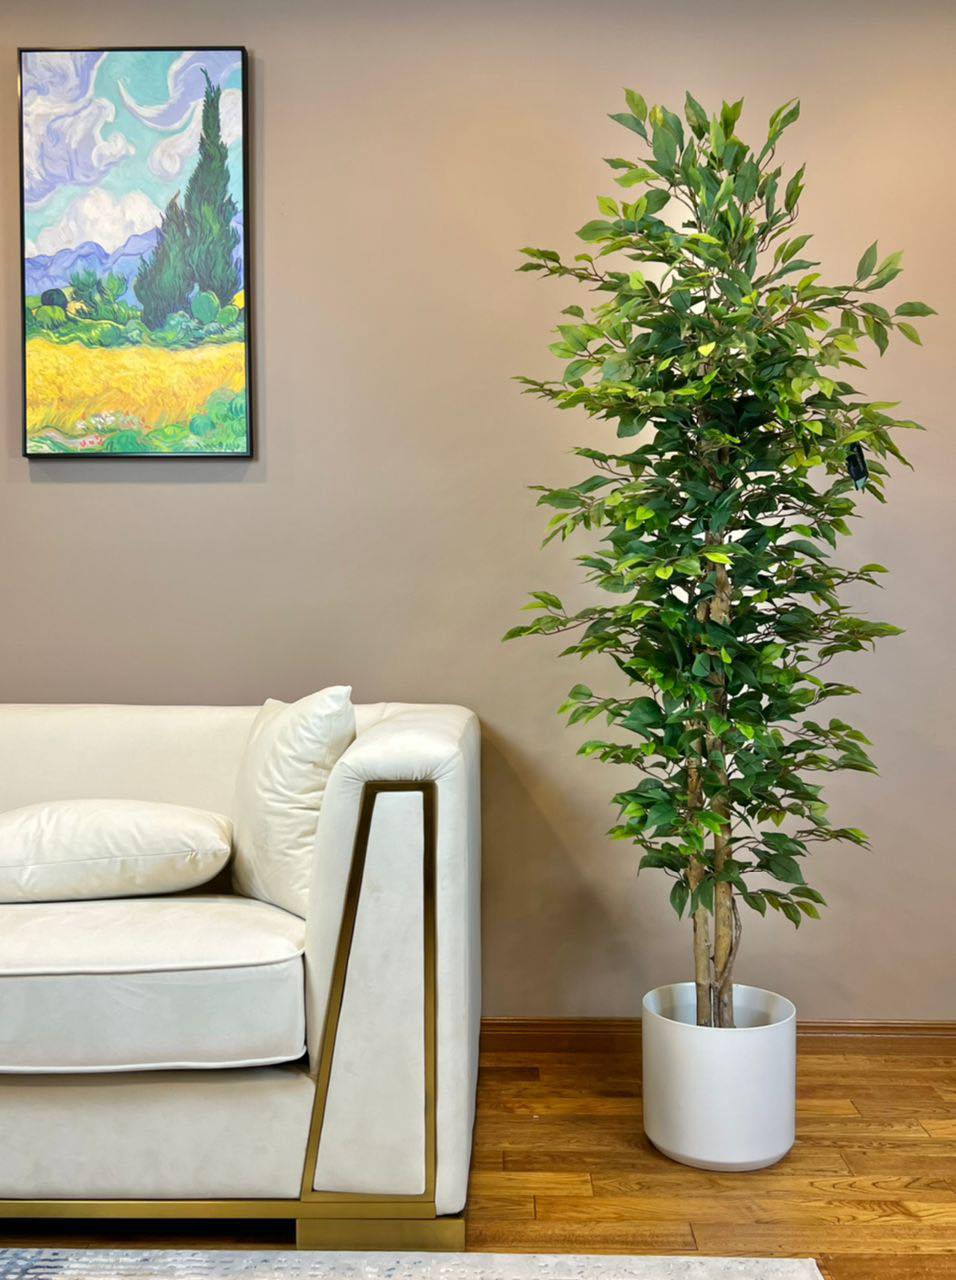 A 6 ft tall Artificial Ficus tree